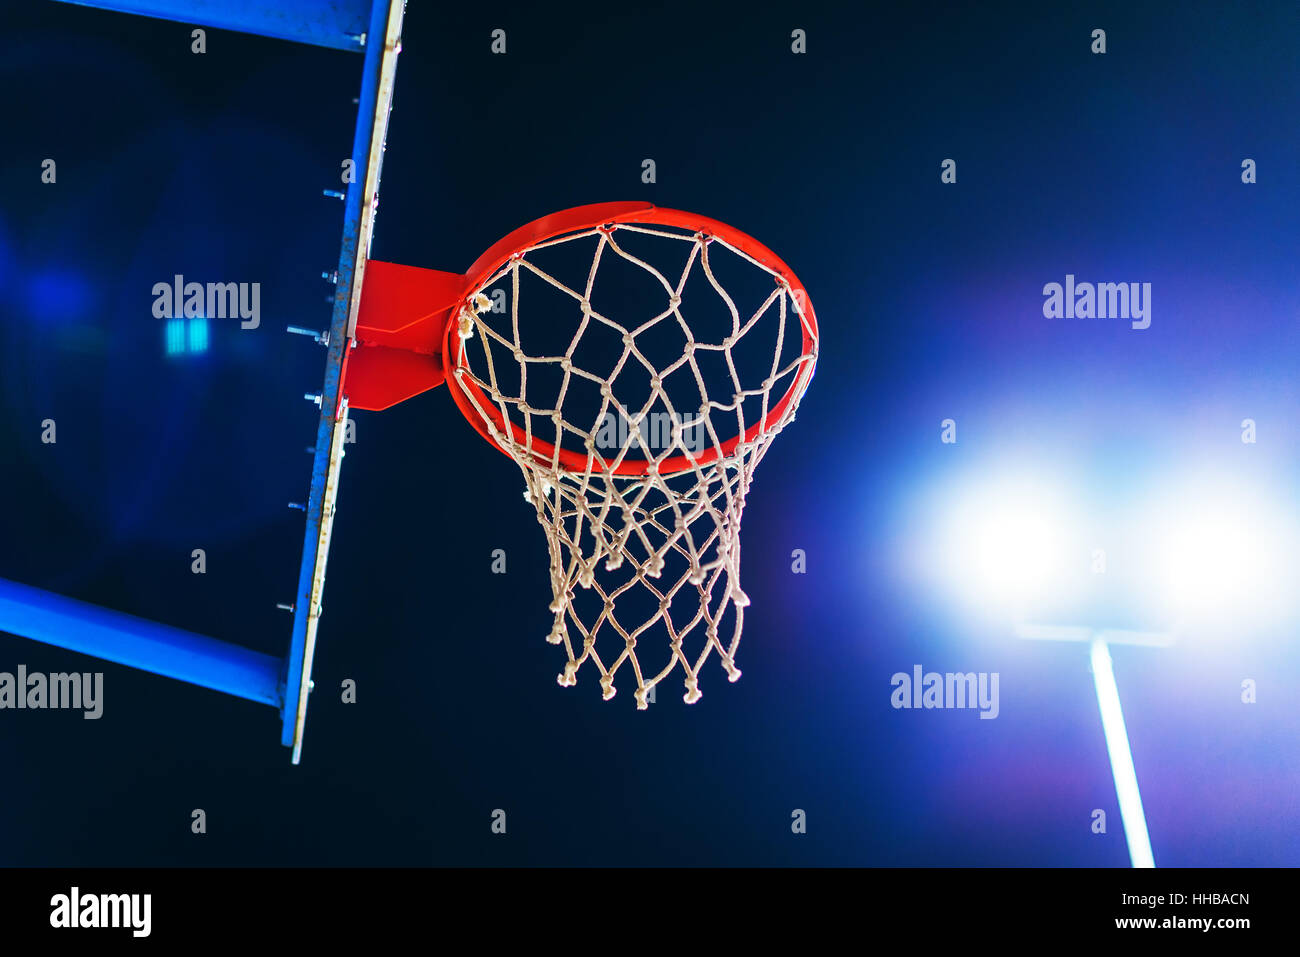 Basketball hoop on outdoor sport court at night with lens flare Stock Photo